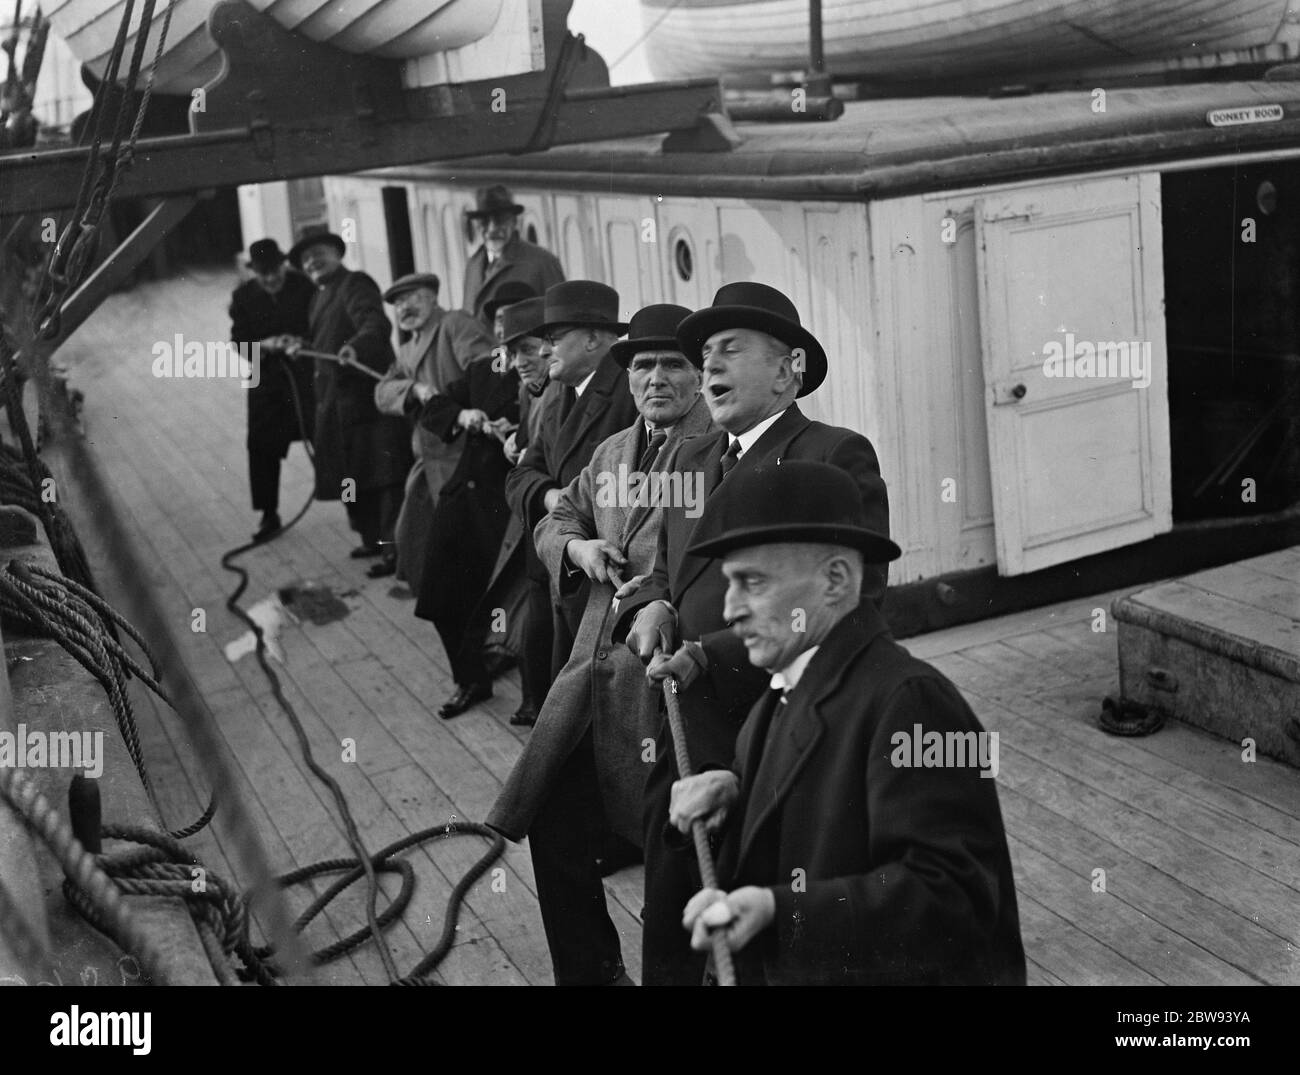 Old salts visit the Cutty Sark in Greenhithe , Kent . The old salts pull the rigging rope . Commander Irving is 2nd from front . 1938 . Stock Photo